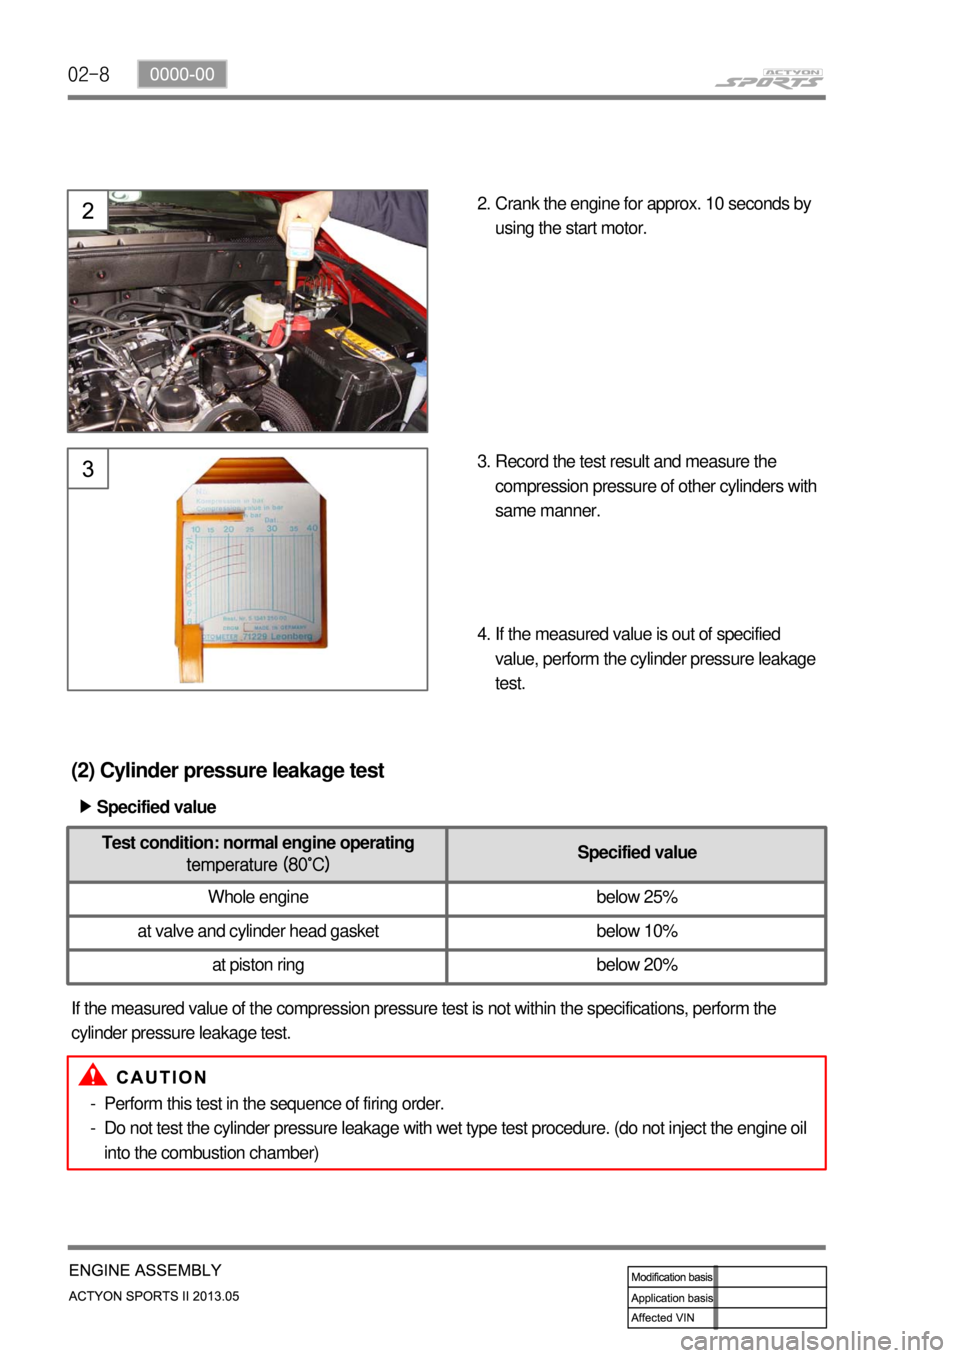 SSANGYONG NEW ACTYON SPORTS 2013  Service Manual 02-8
(2) Cylinder pressure leakage test
If the measured value of the compression pressure test is not within the specifications, perform the 
cylinder pressure leakage test.Specified value ▶
Perform